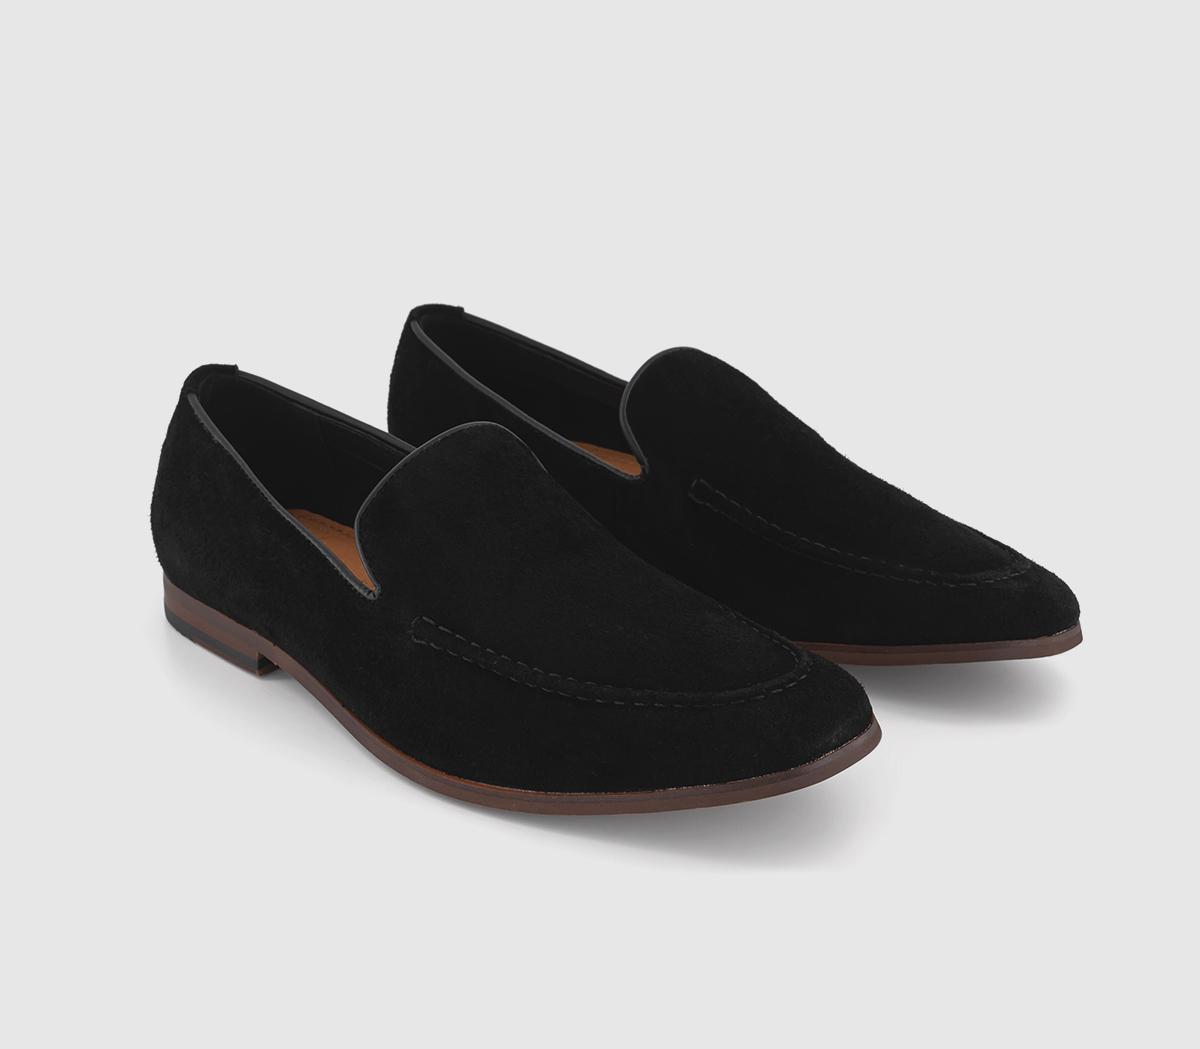 OFFICE Mens Cody Slip On Loafers Black Suede, 9